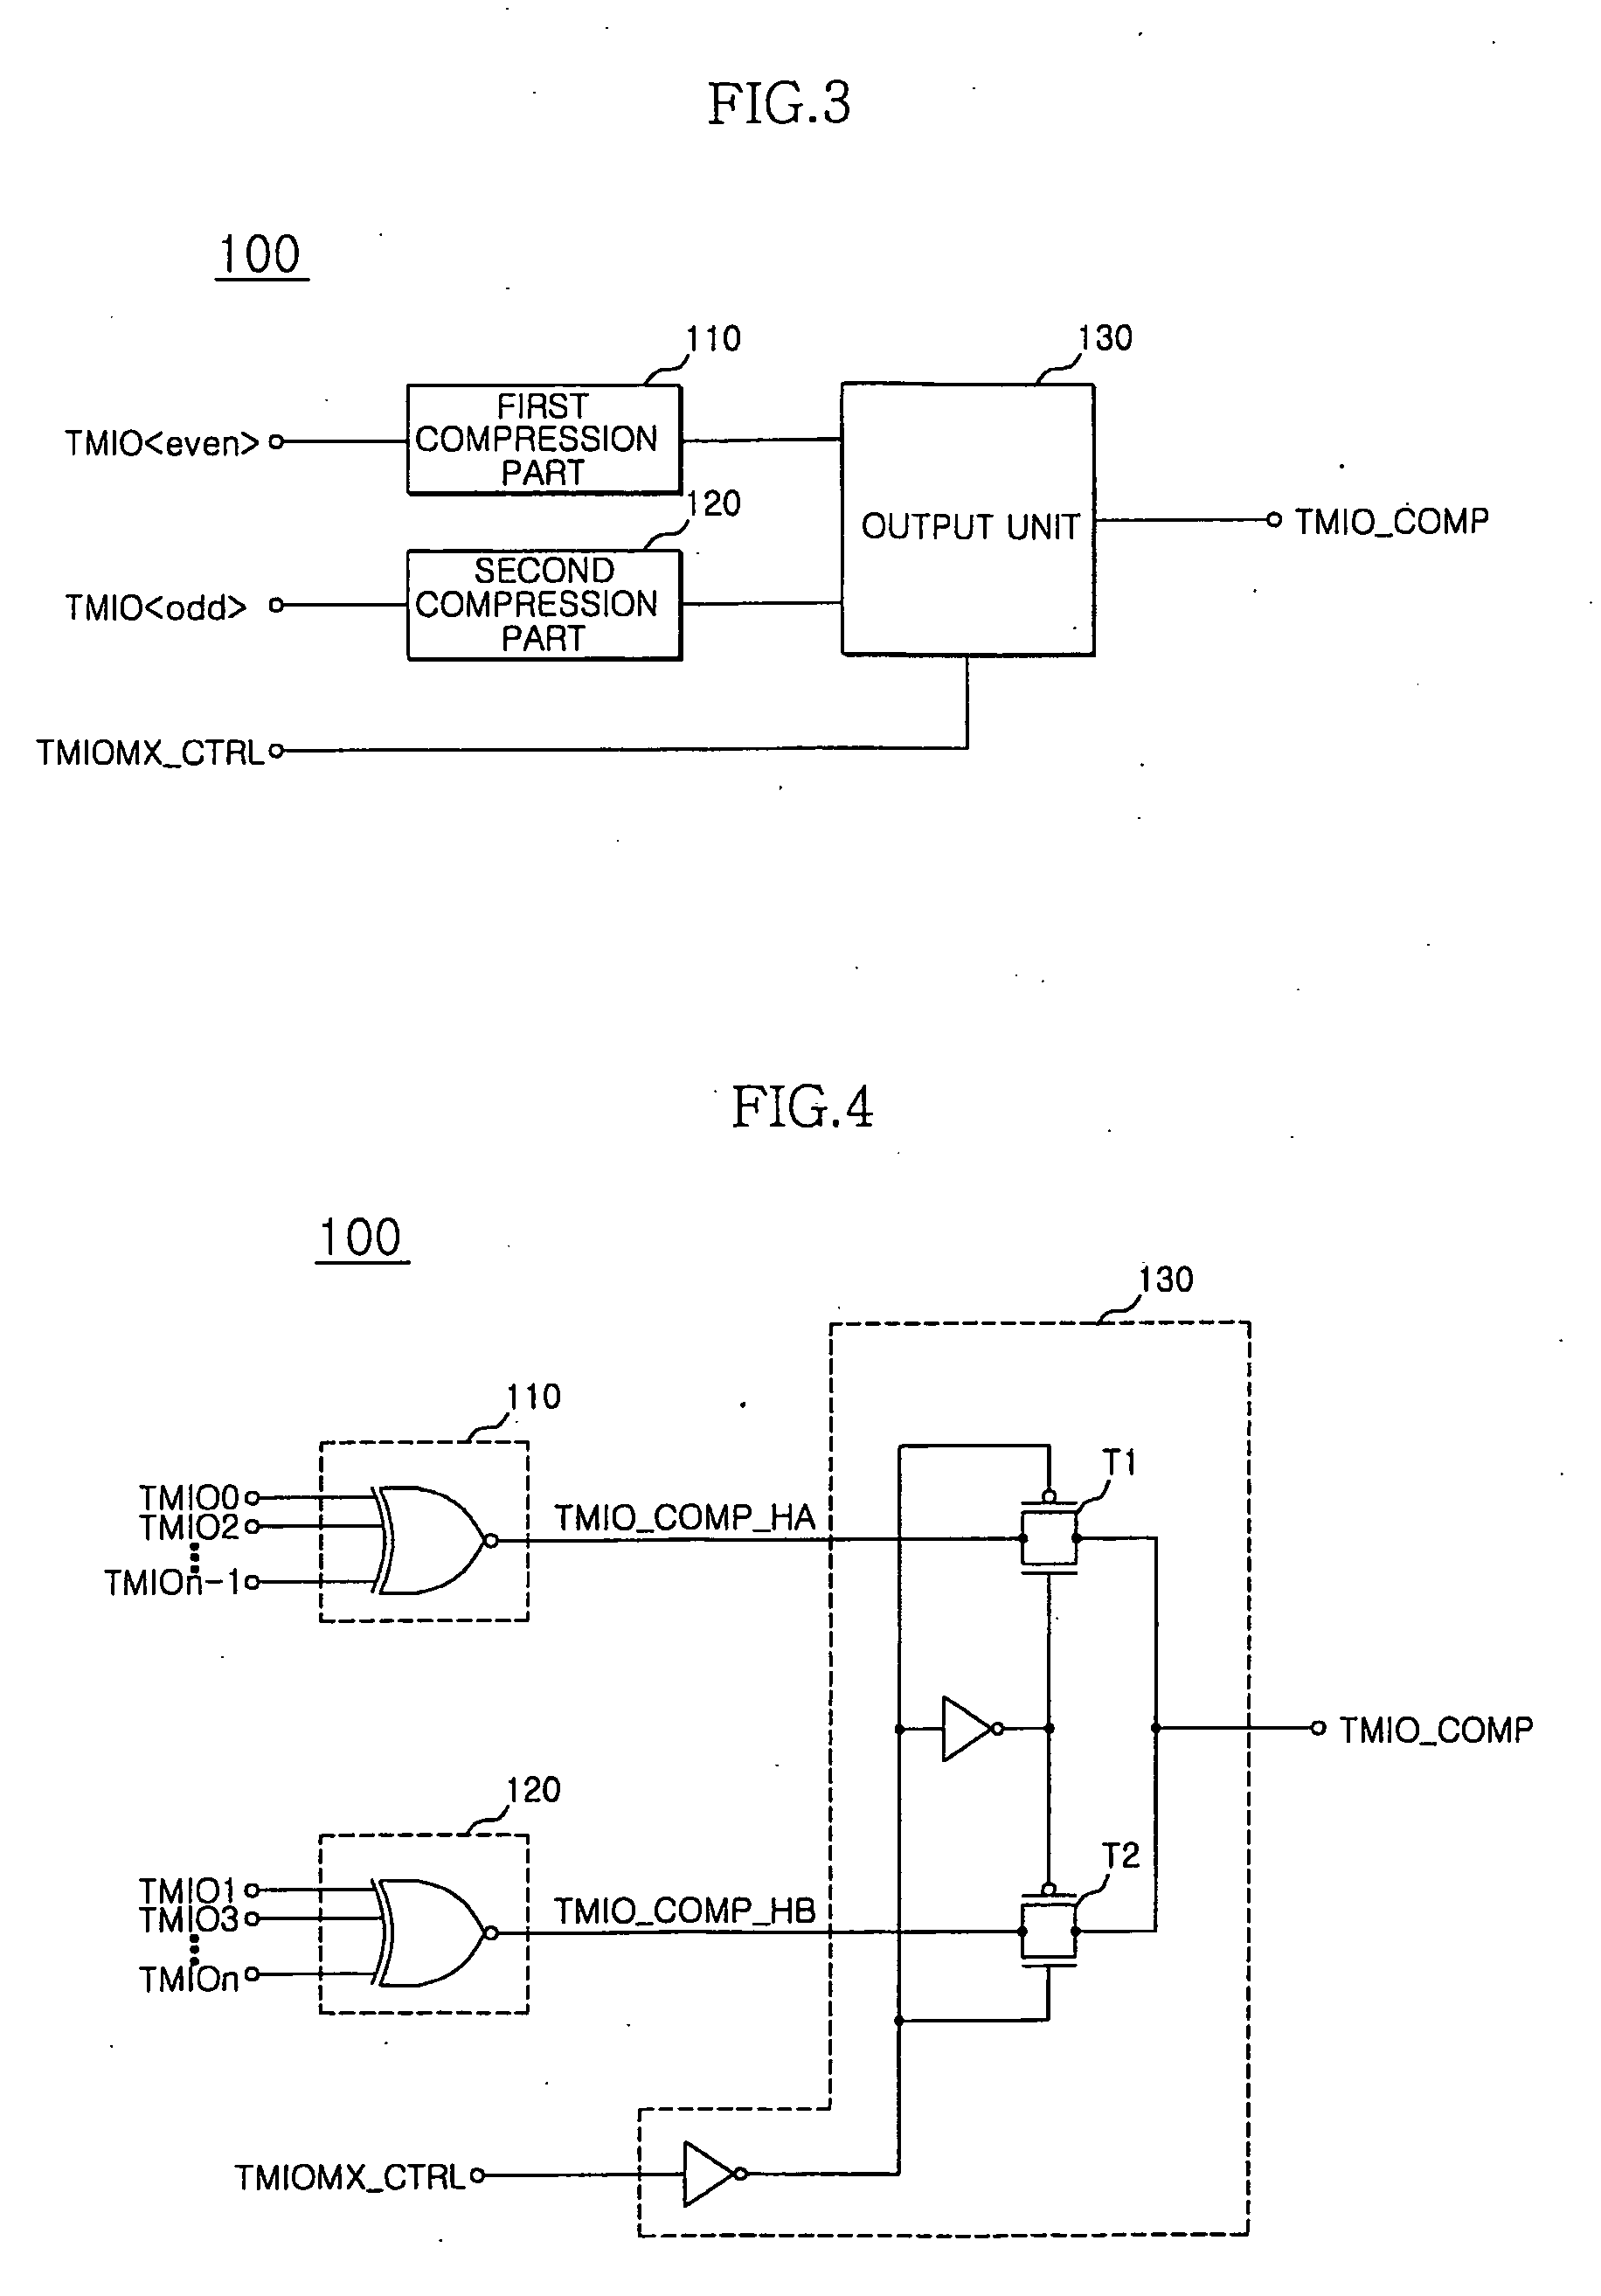 Semiconductor memory apparatus and test circuit therefor